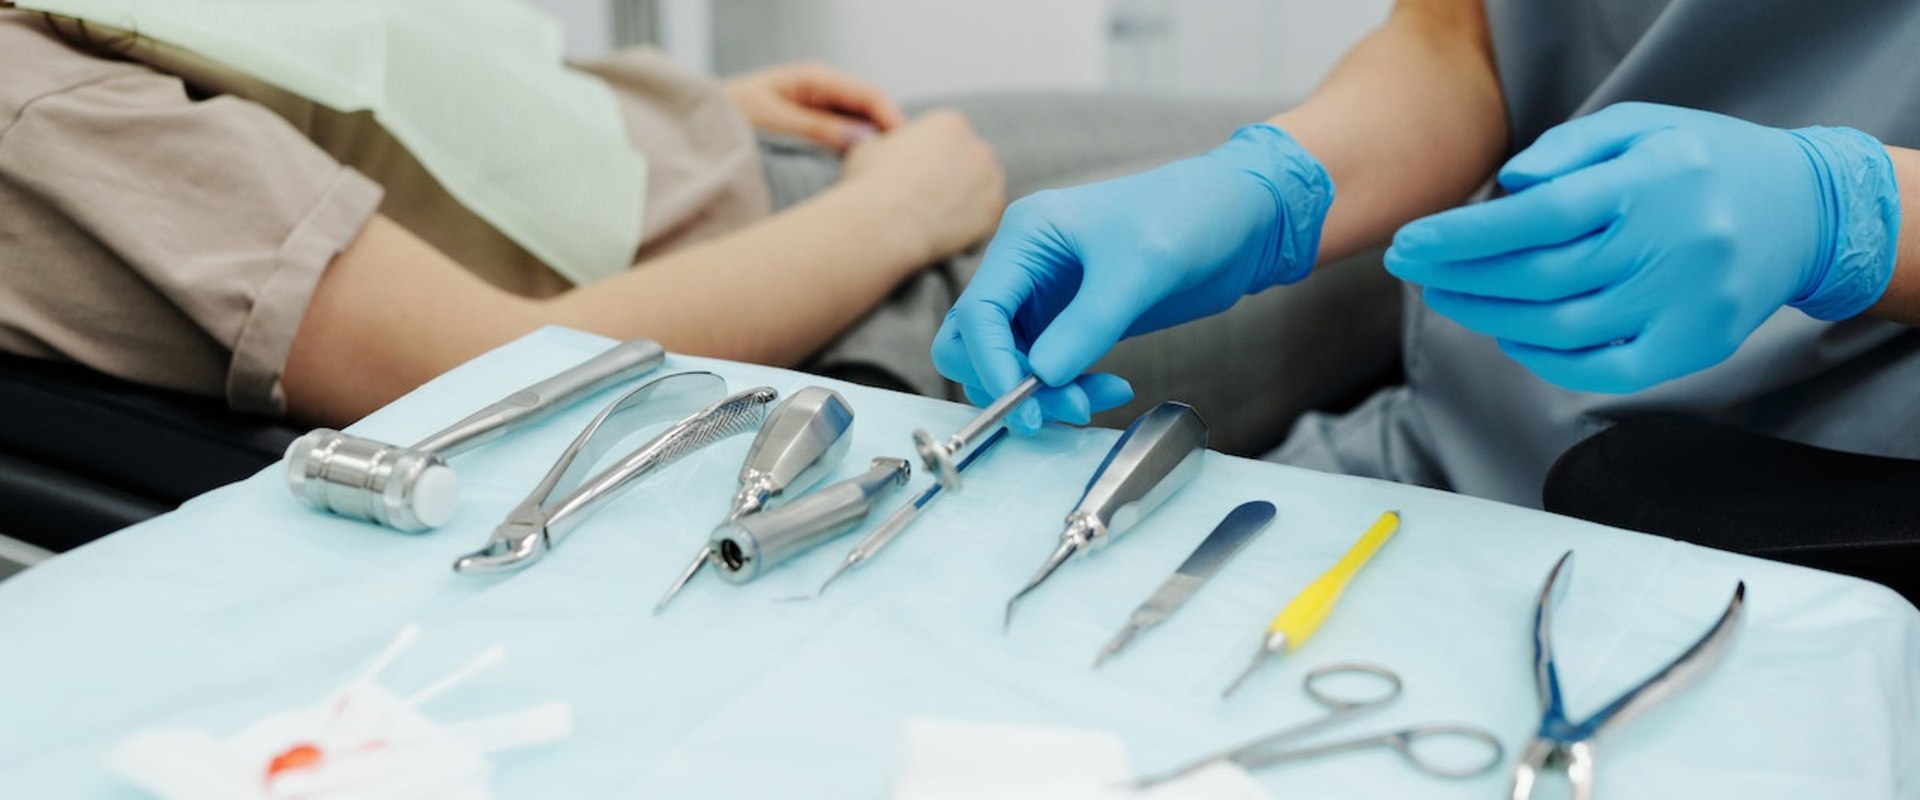 Behind The Scenes: Dentistry Tools For All-on-Four Dental Implants In Sydney